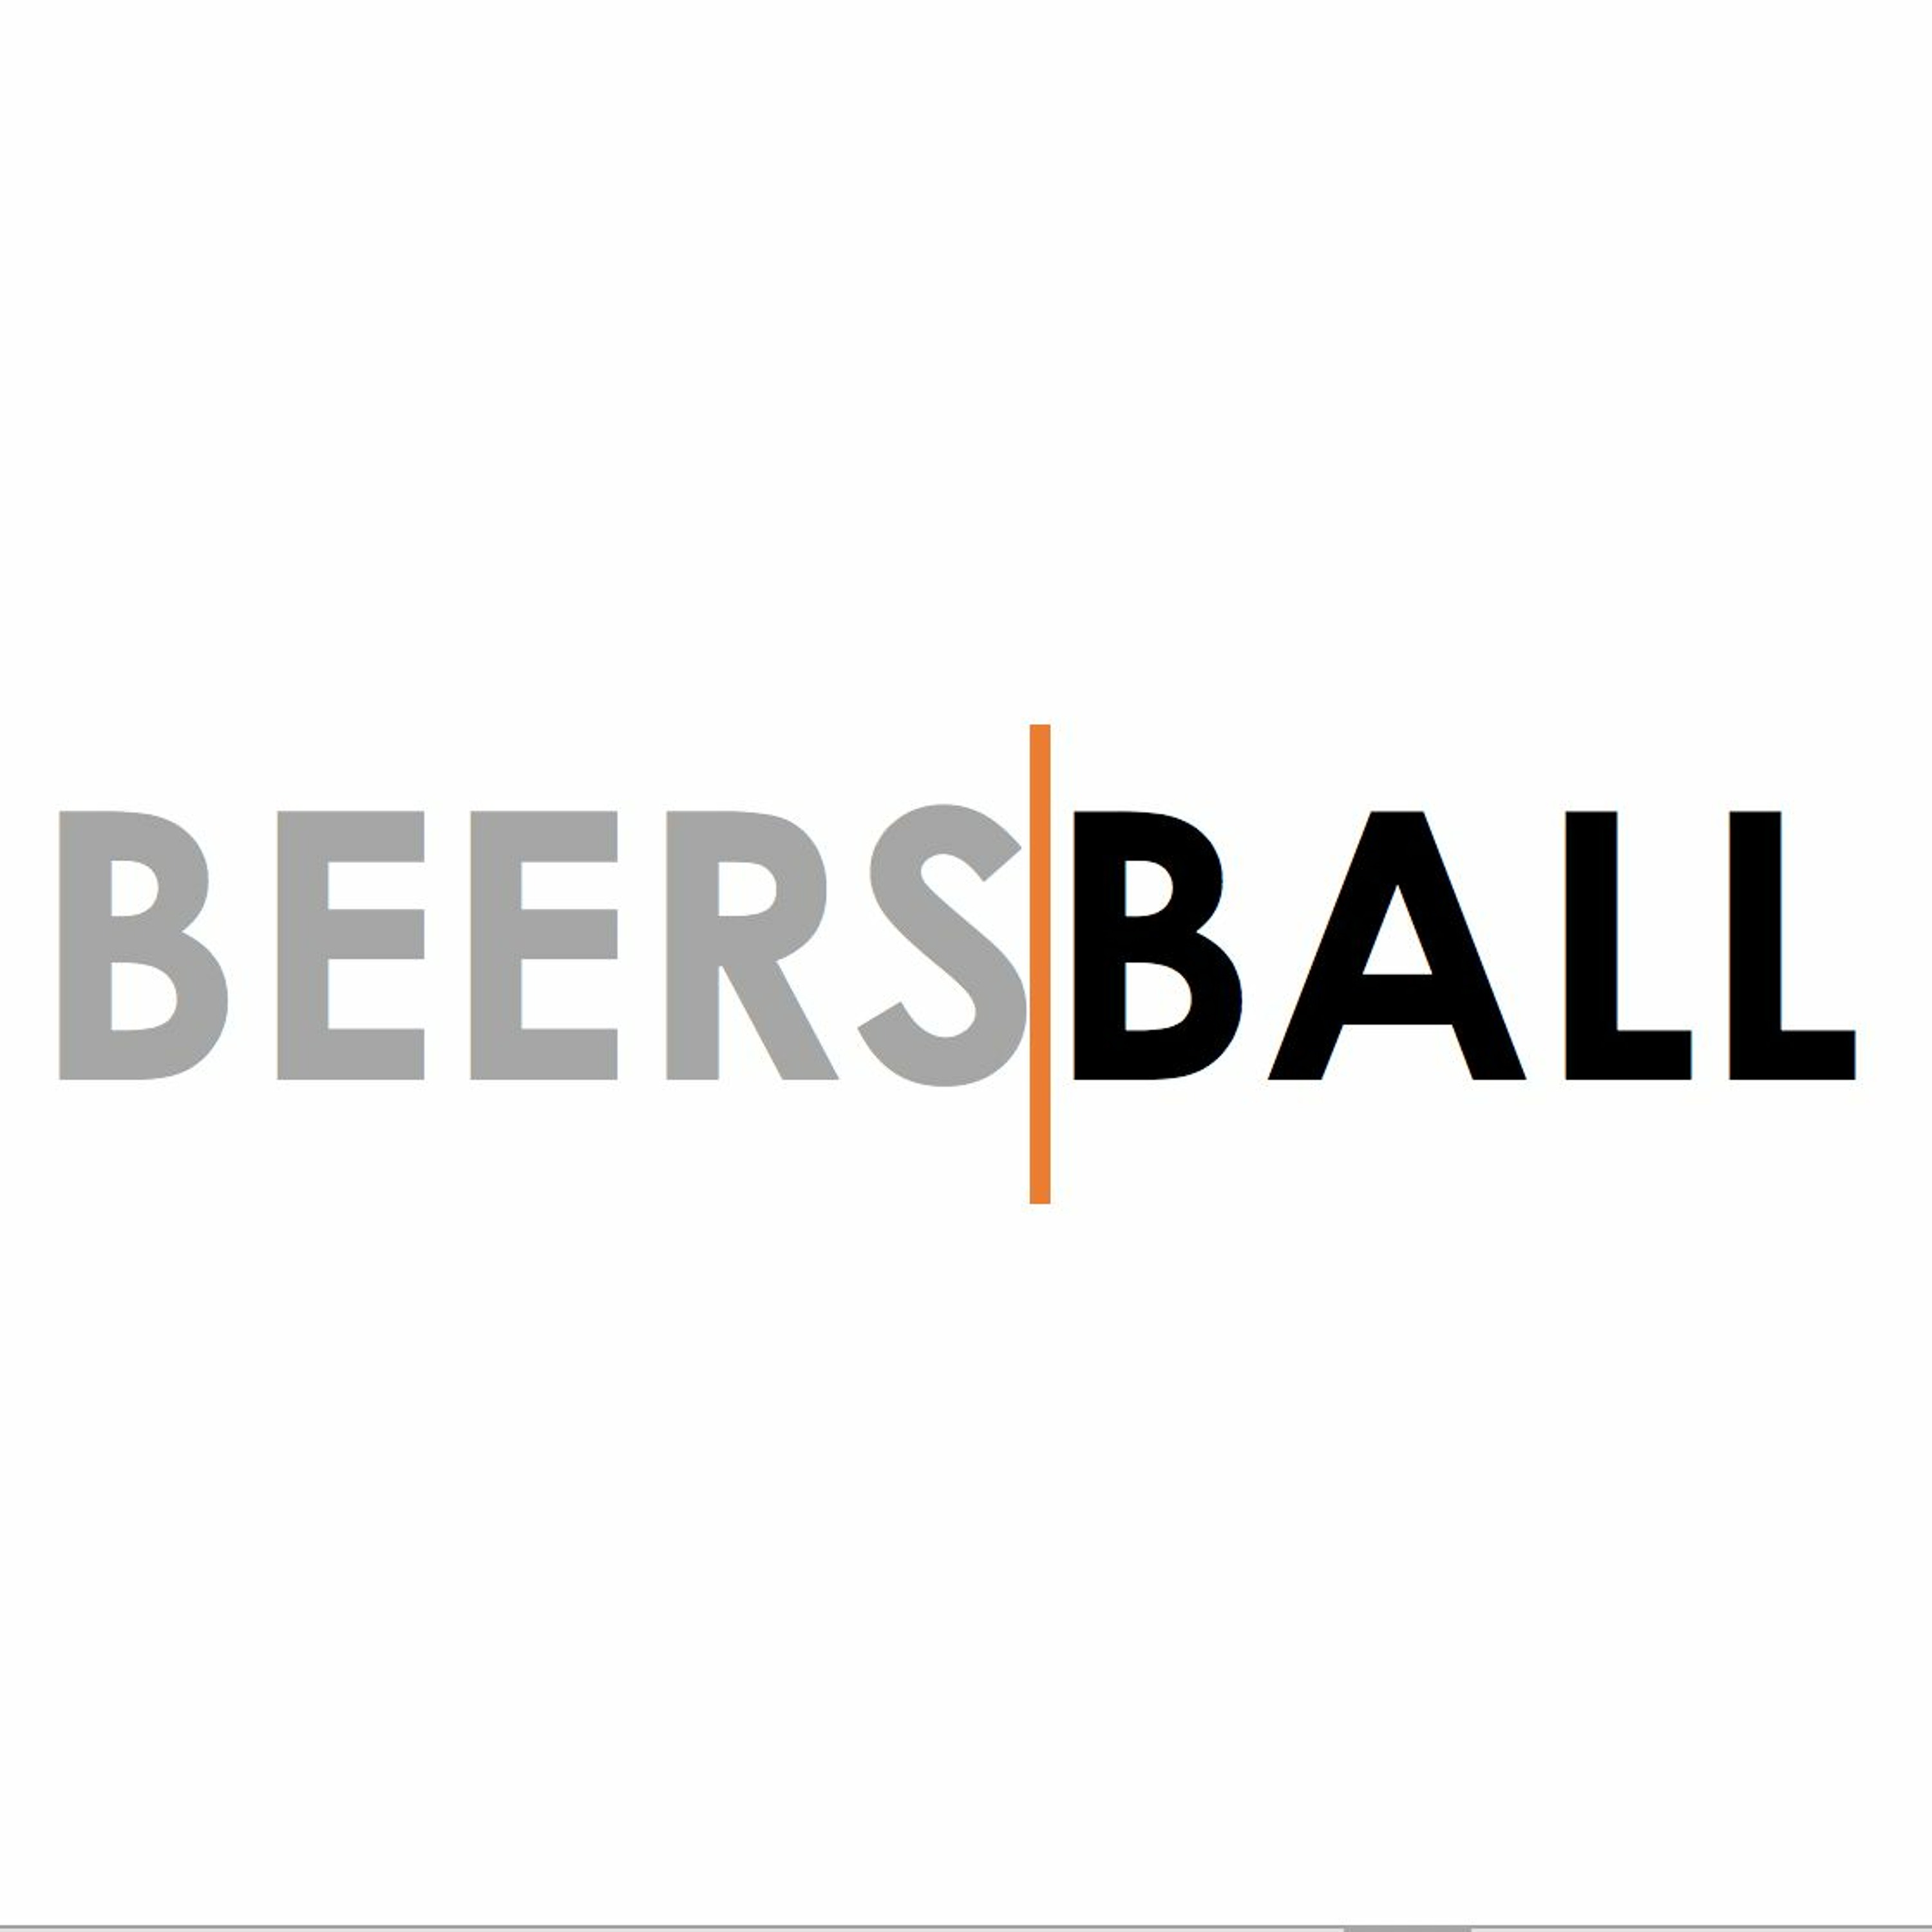 THE BEERS AND BALL OFFICIAL 2020-2021 NBA SEASON PREVIEW